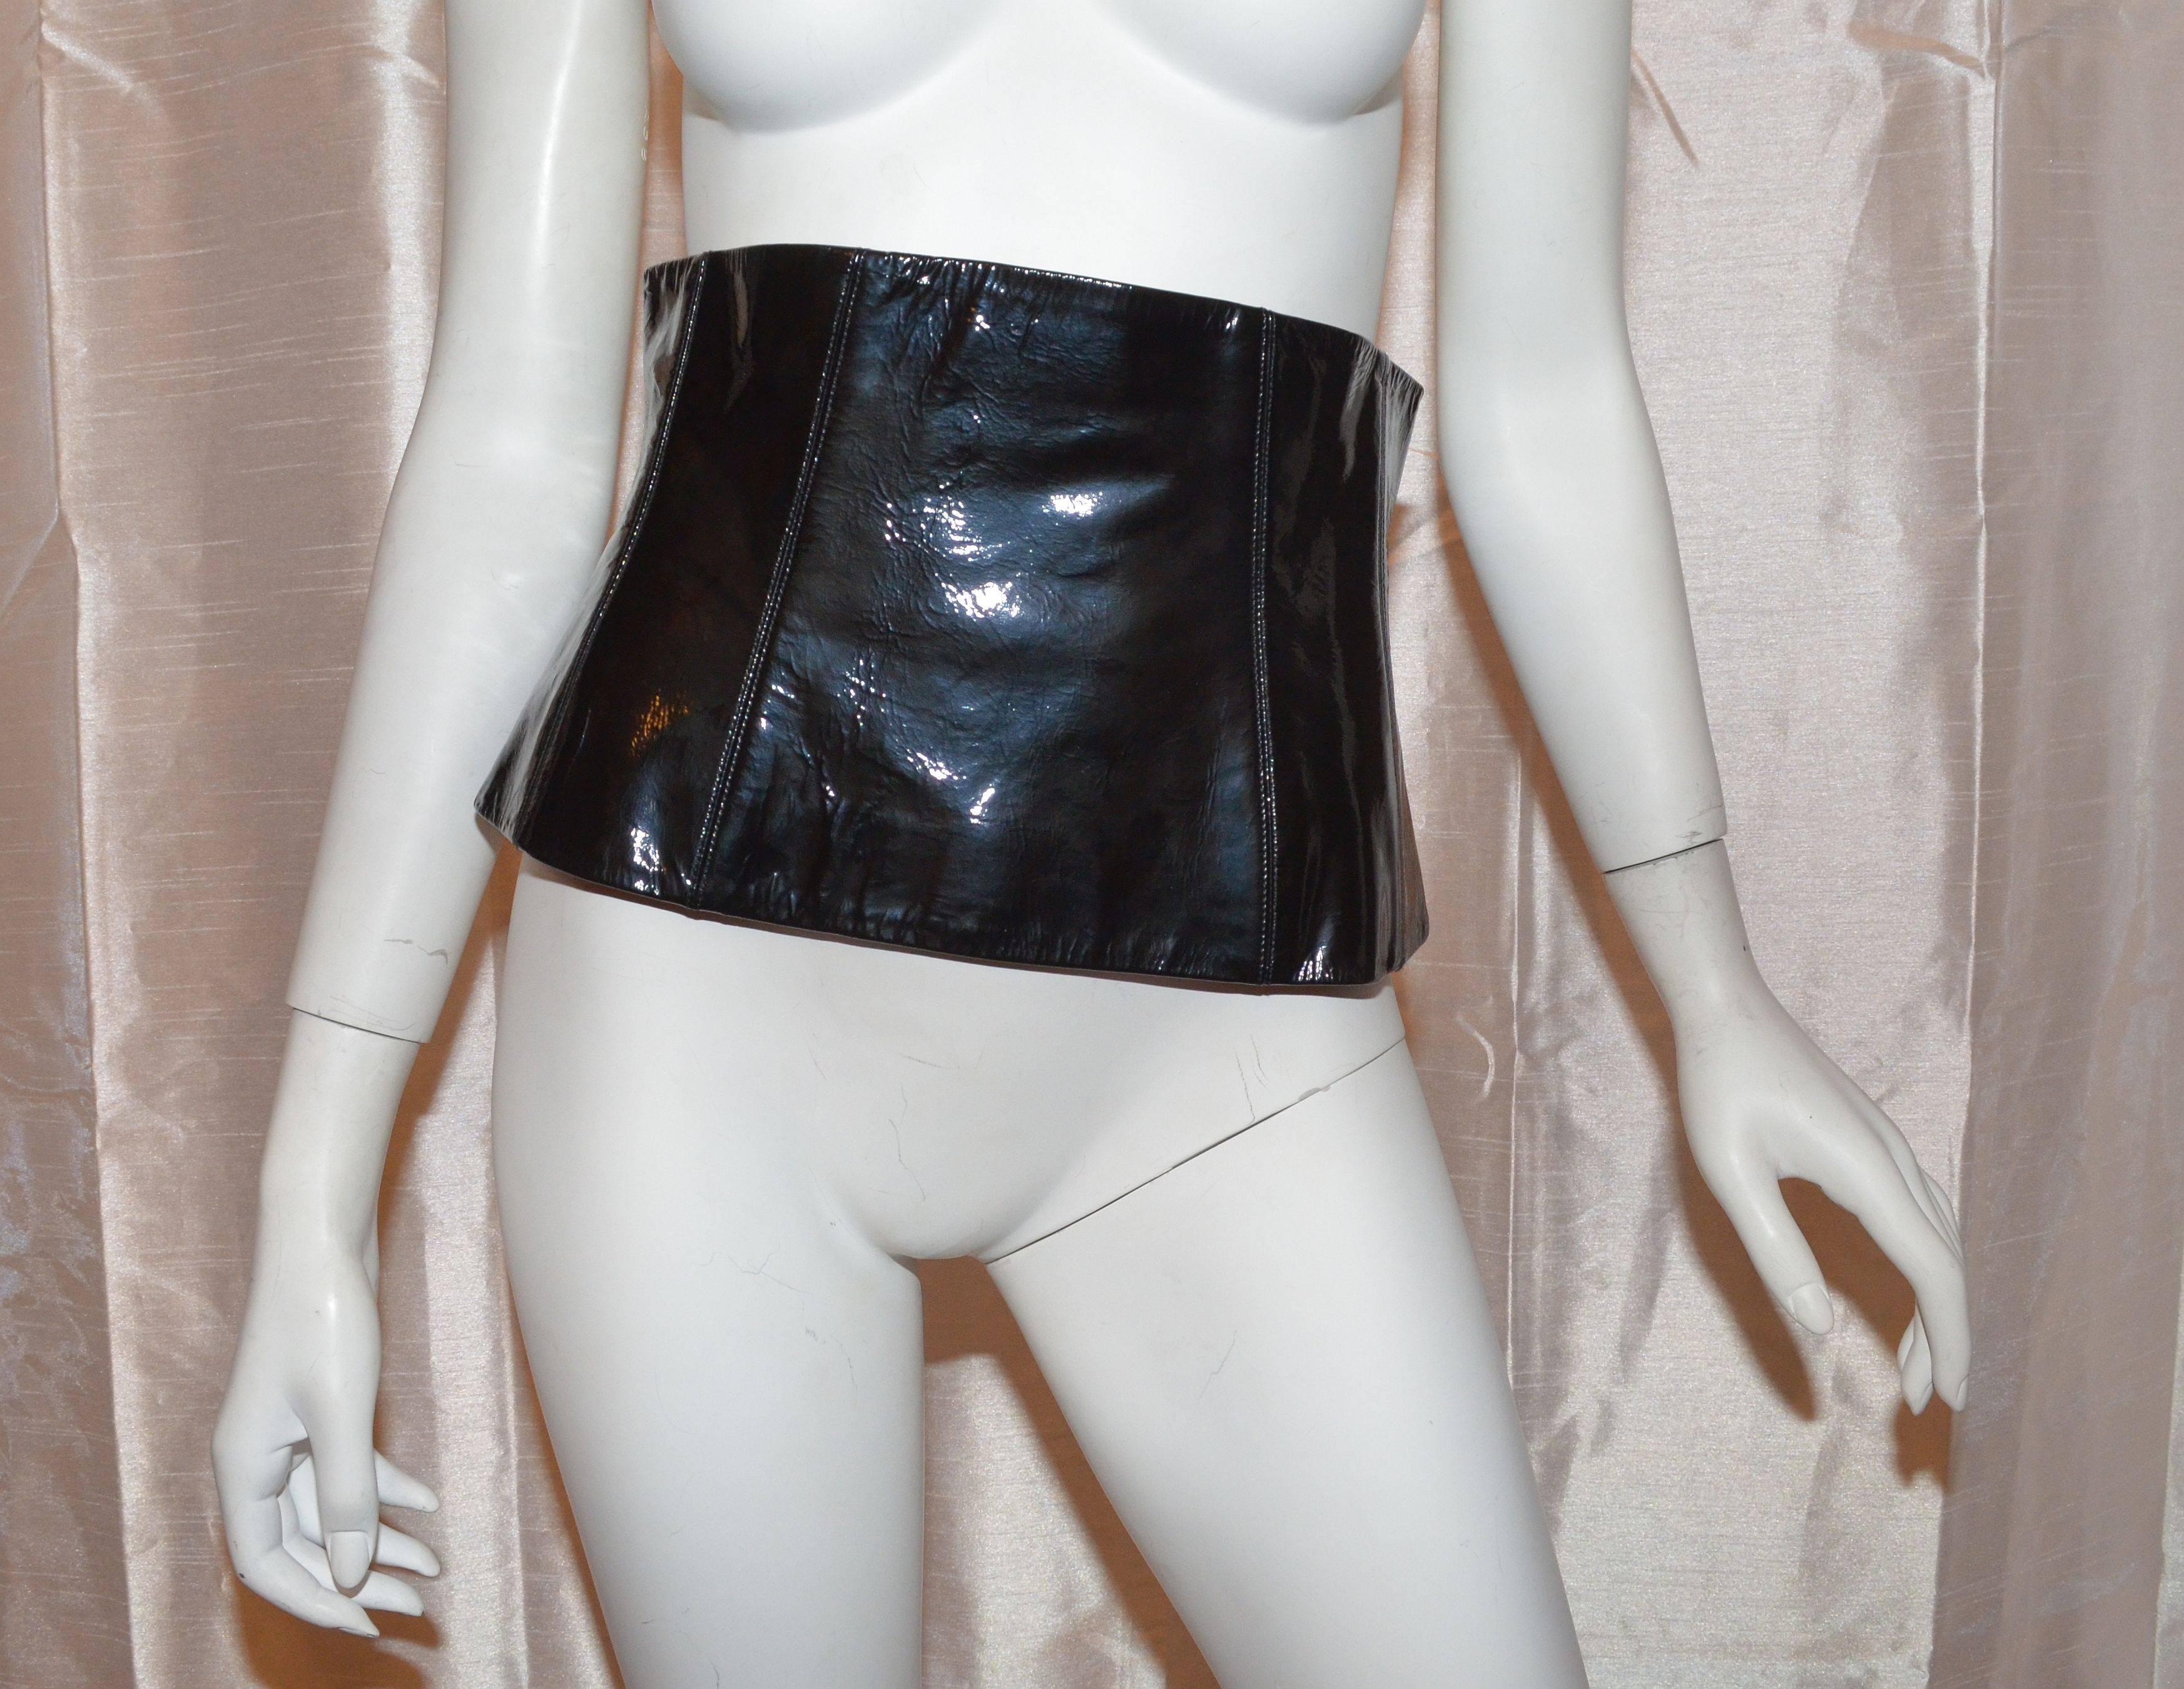 Chanel waist cinched belt has a back zipper fastening and hook-and-eye closure, and is made with 100% patent leather lambskin and lined in 100% silk. Labeled a size 38 and made in France.

Measurements:
Waist - 28''
Length - 8.5''